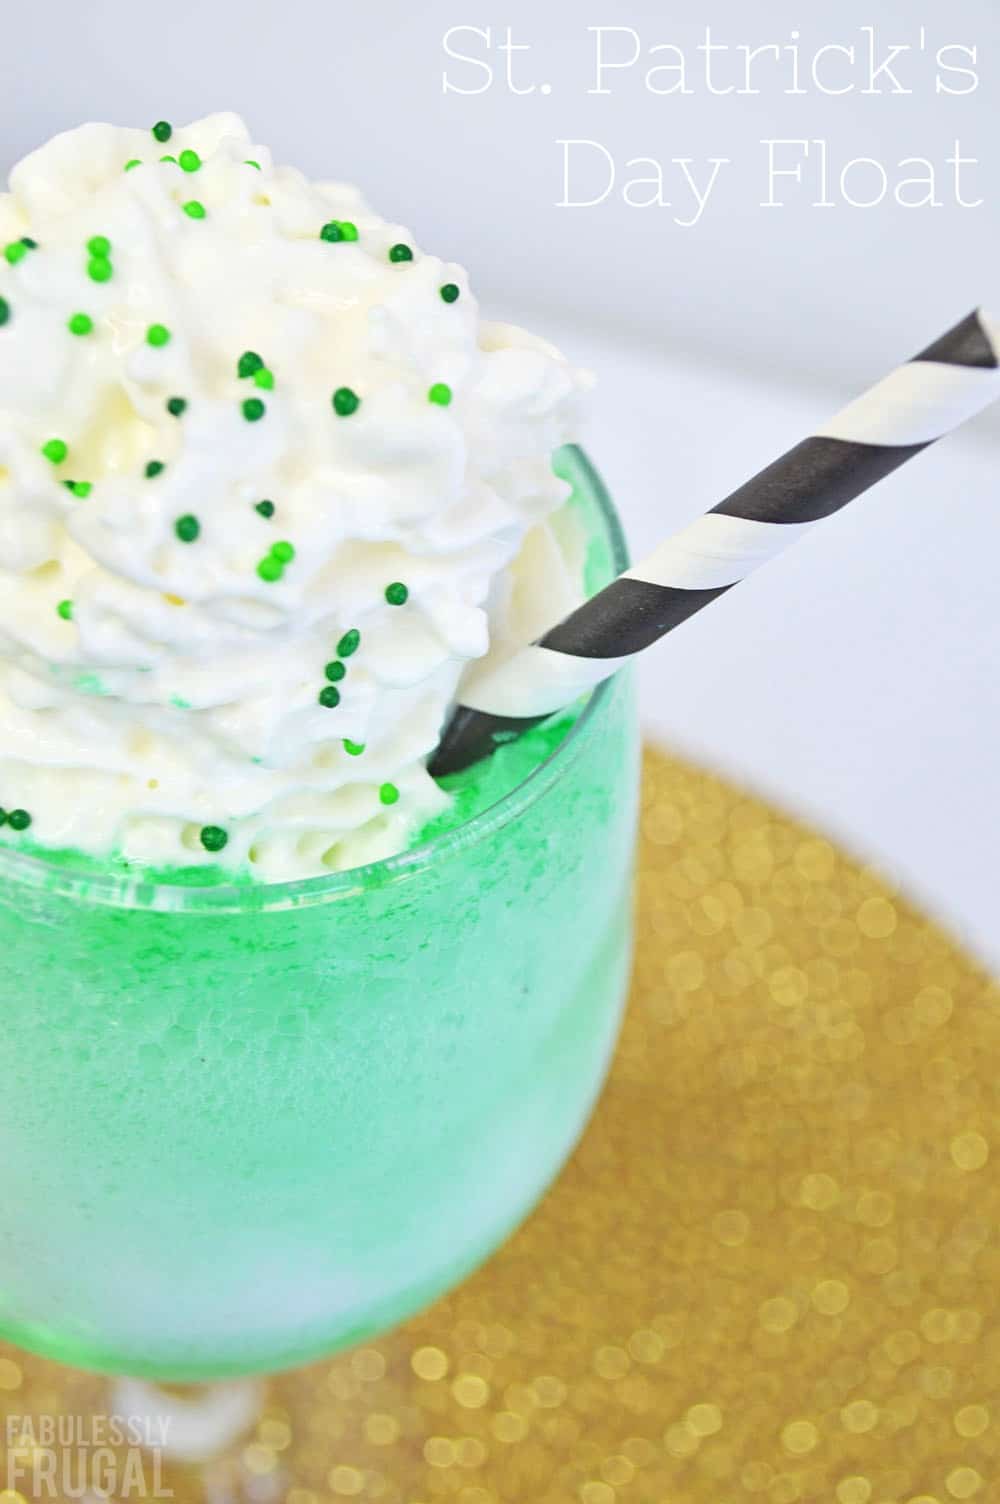 St. Patrick's Day ice cream float with whipped cream and sprinkles